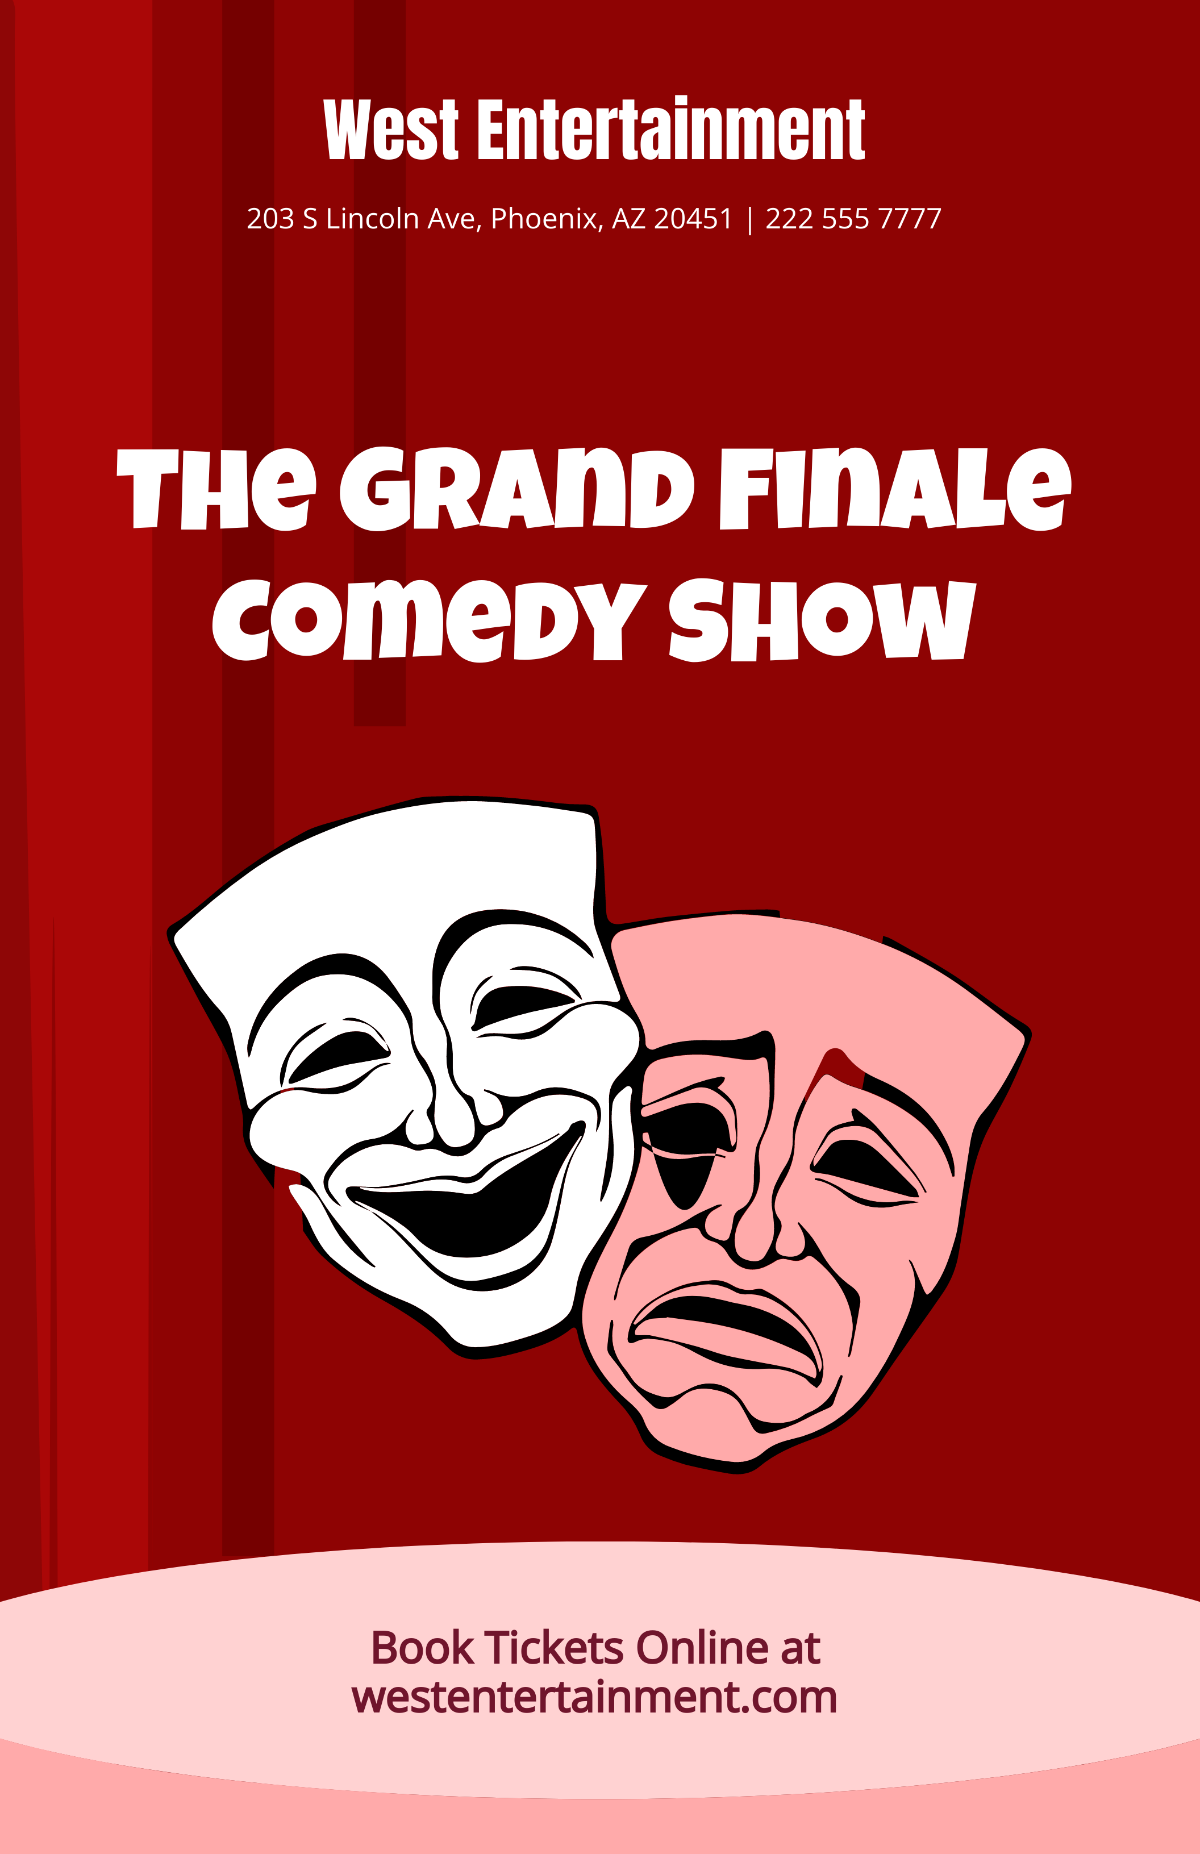 Simple Comedy Show Poster Template